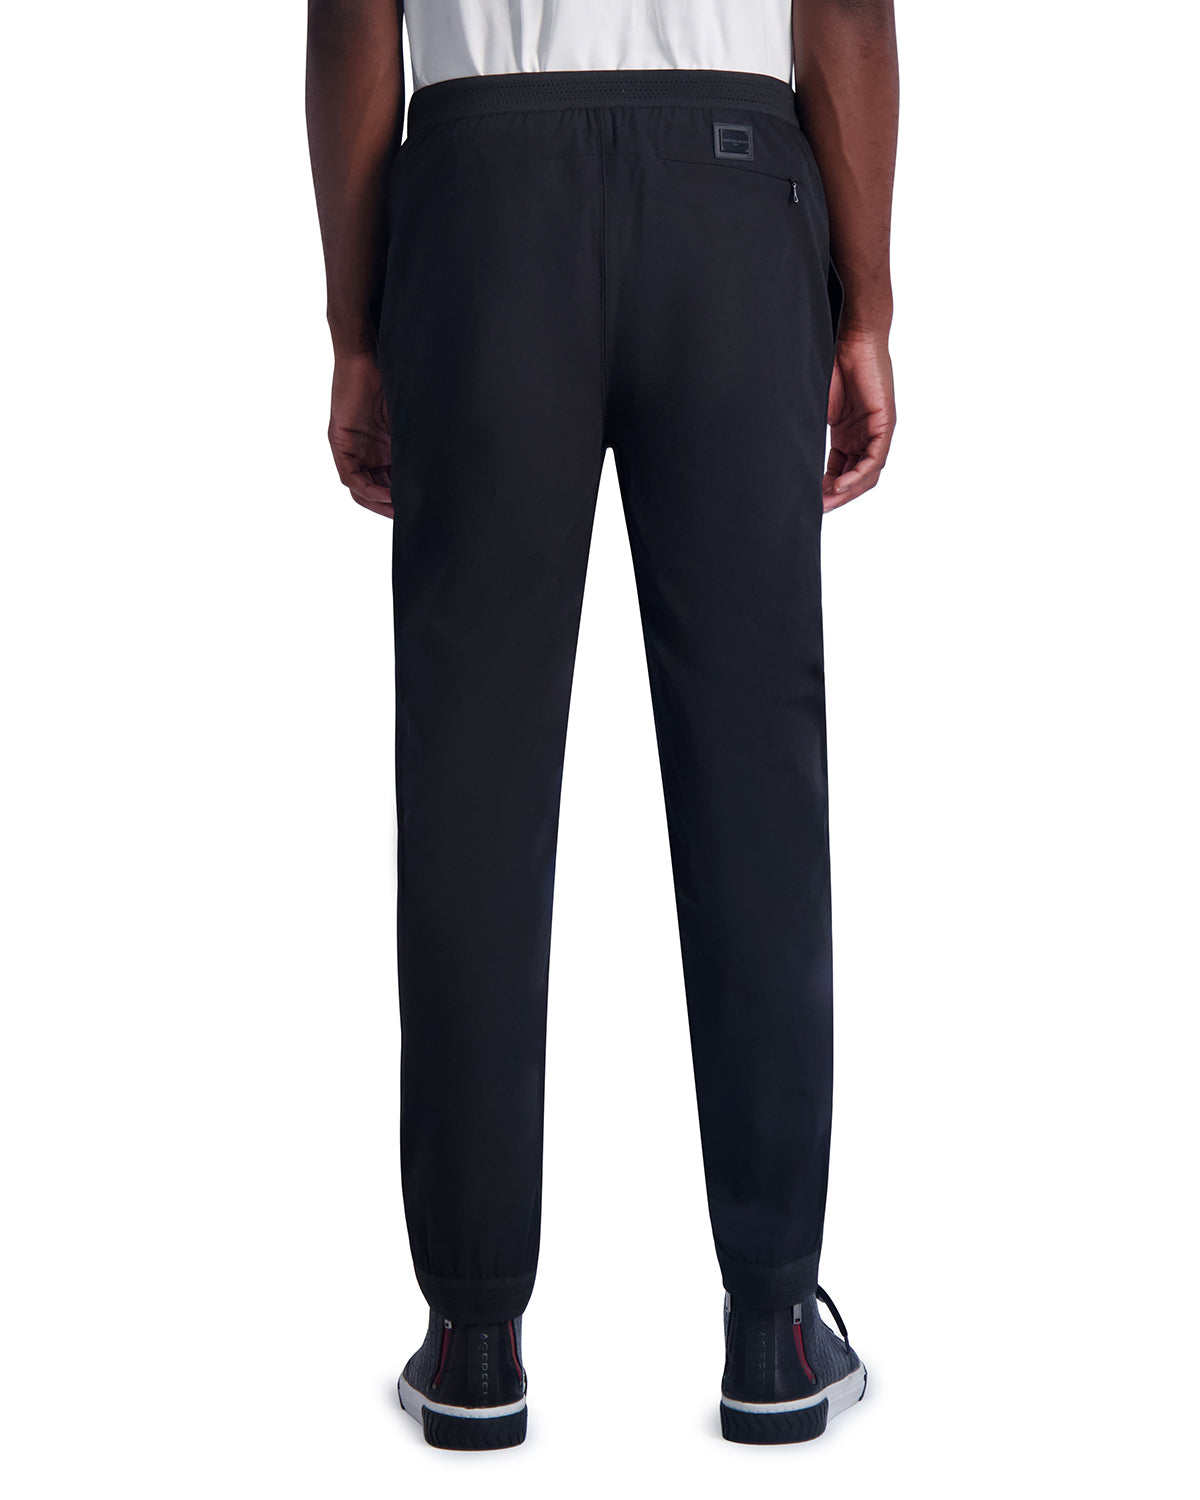 STRETCH NYLON TRACK PANT WITH MESH INSERTS